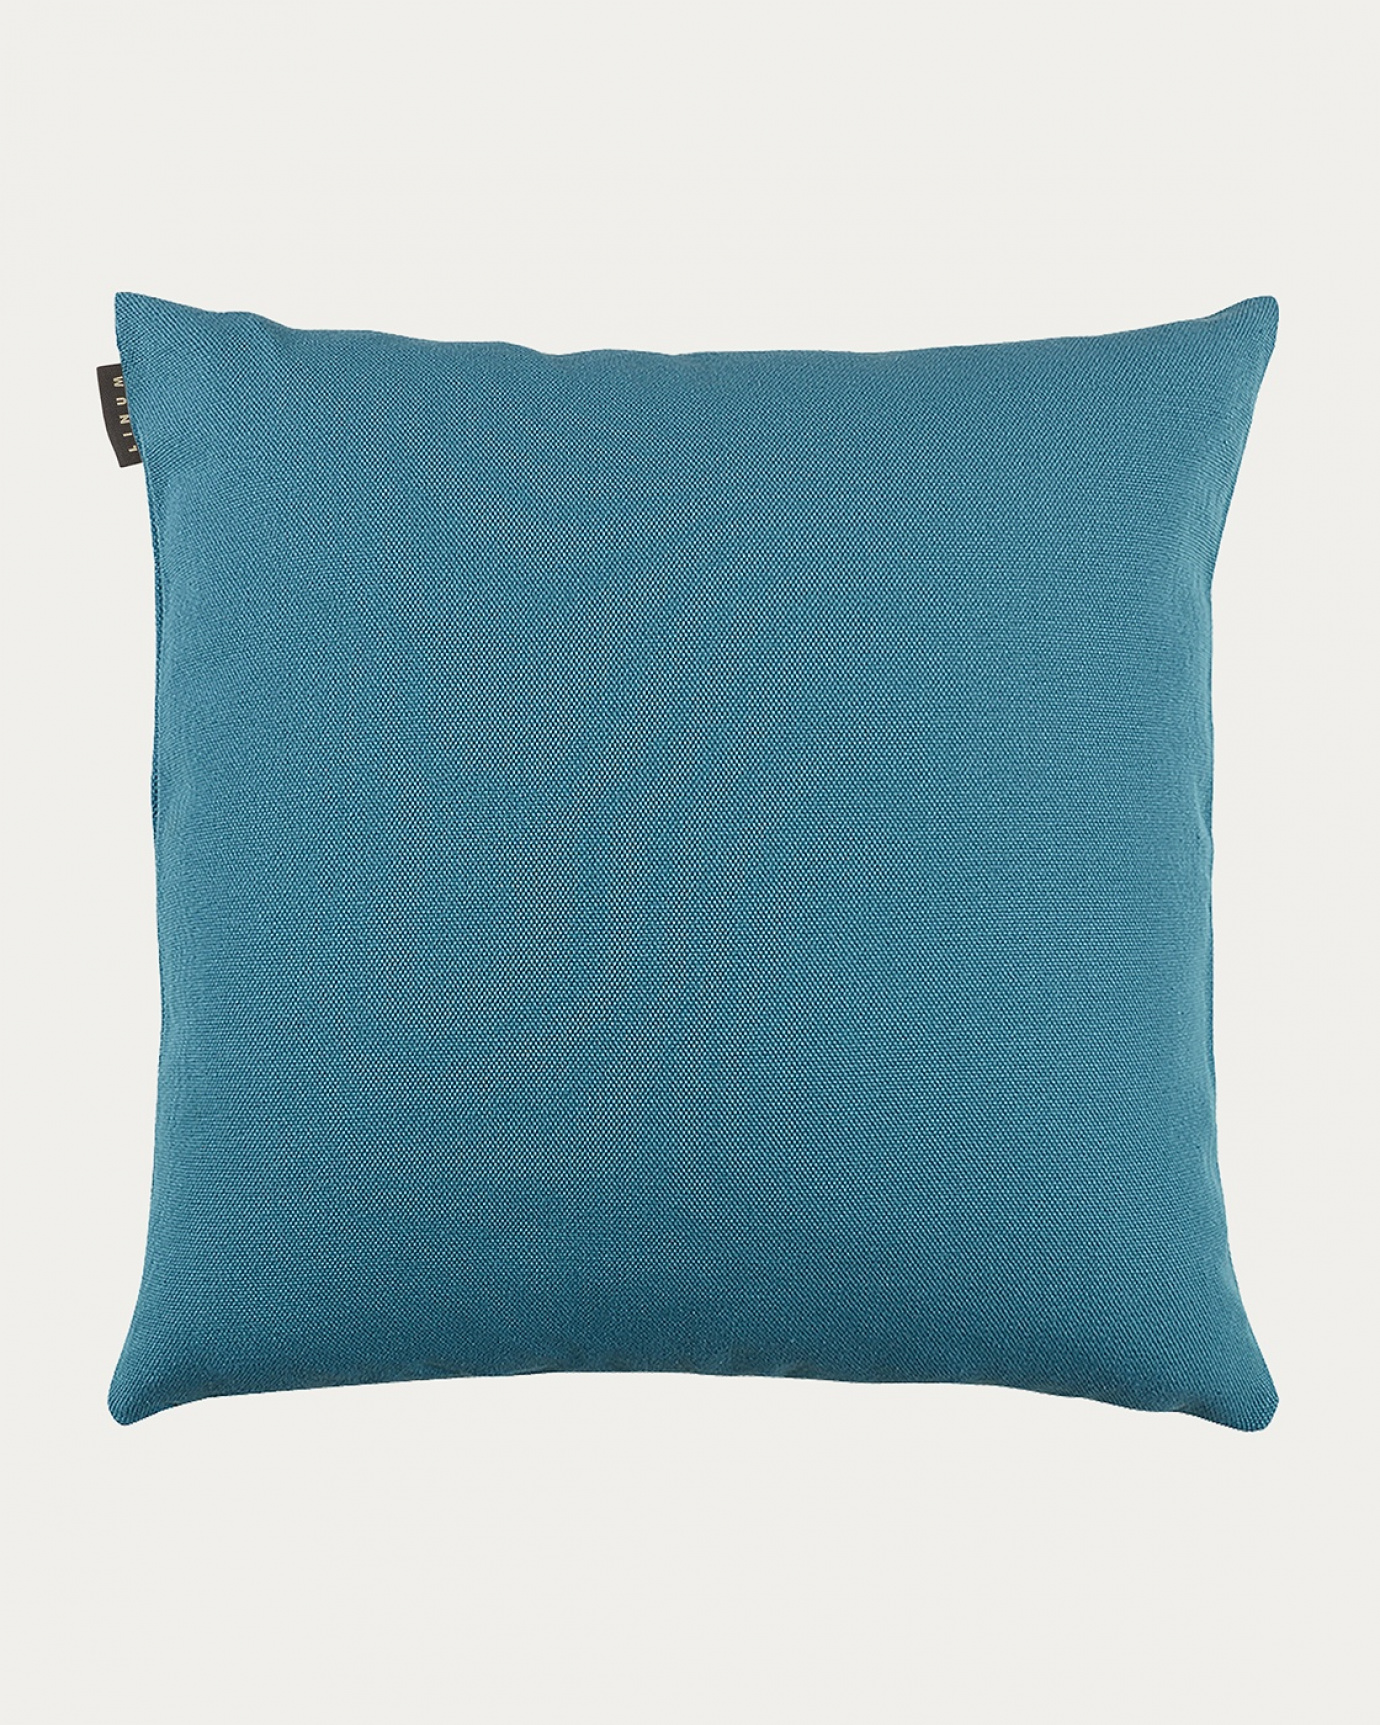 Product image aqua turquoise PEPPER cushion cover made of soft cotton from LINUM DESIGN. Easy to wash and durable for generations. Size 60x60 cm.